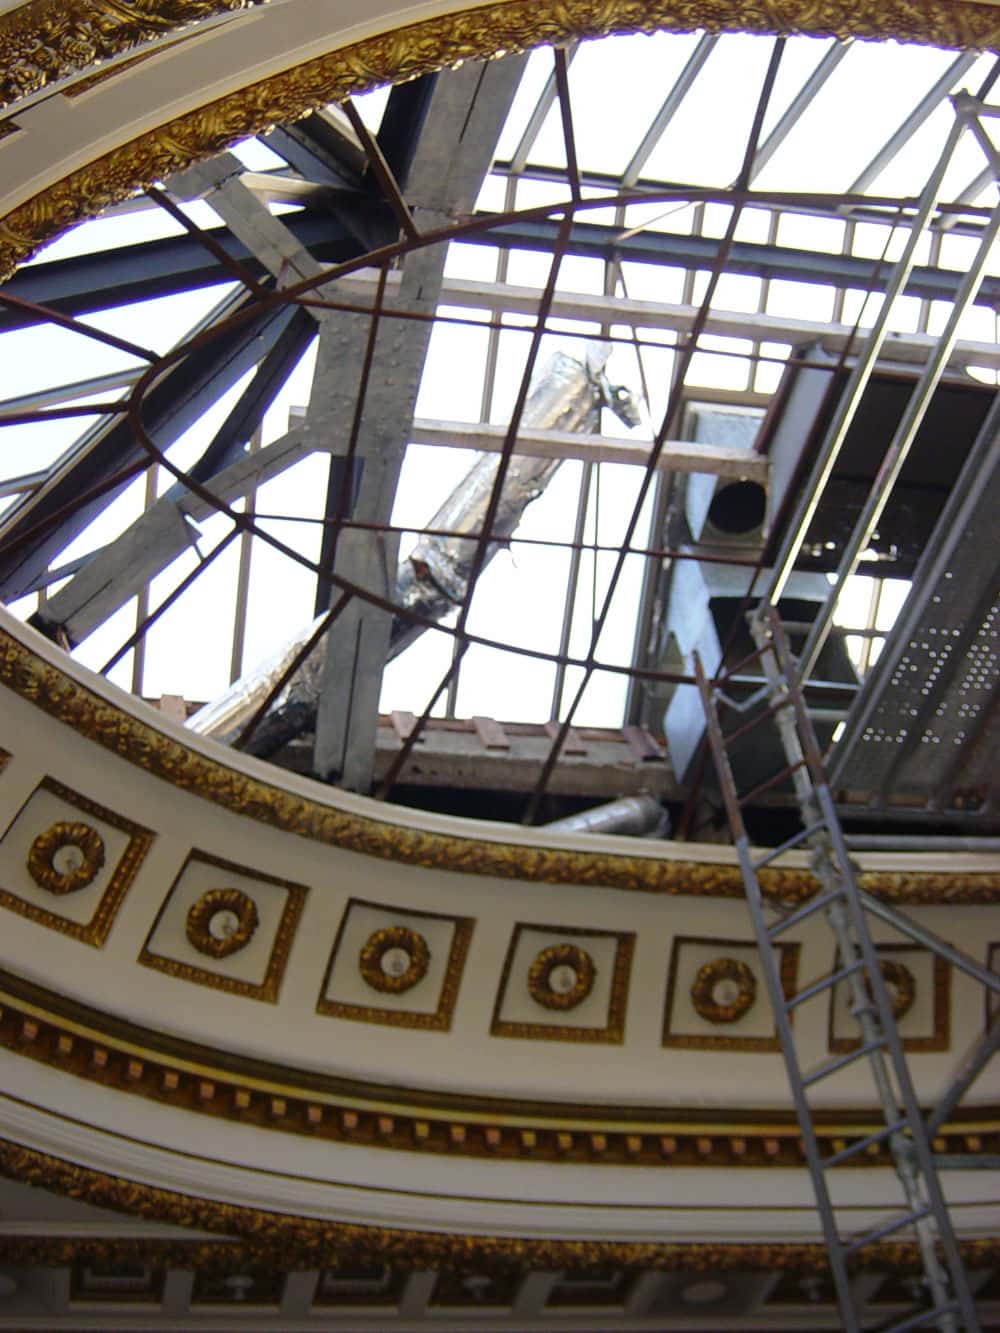 The dome of the San Mateo County Courtroom A with stained glass removed